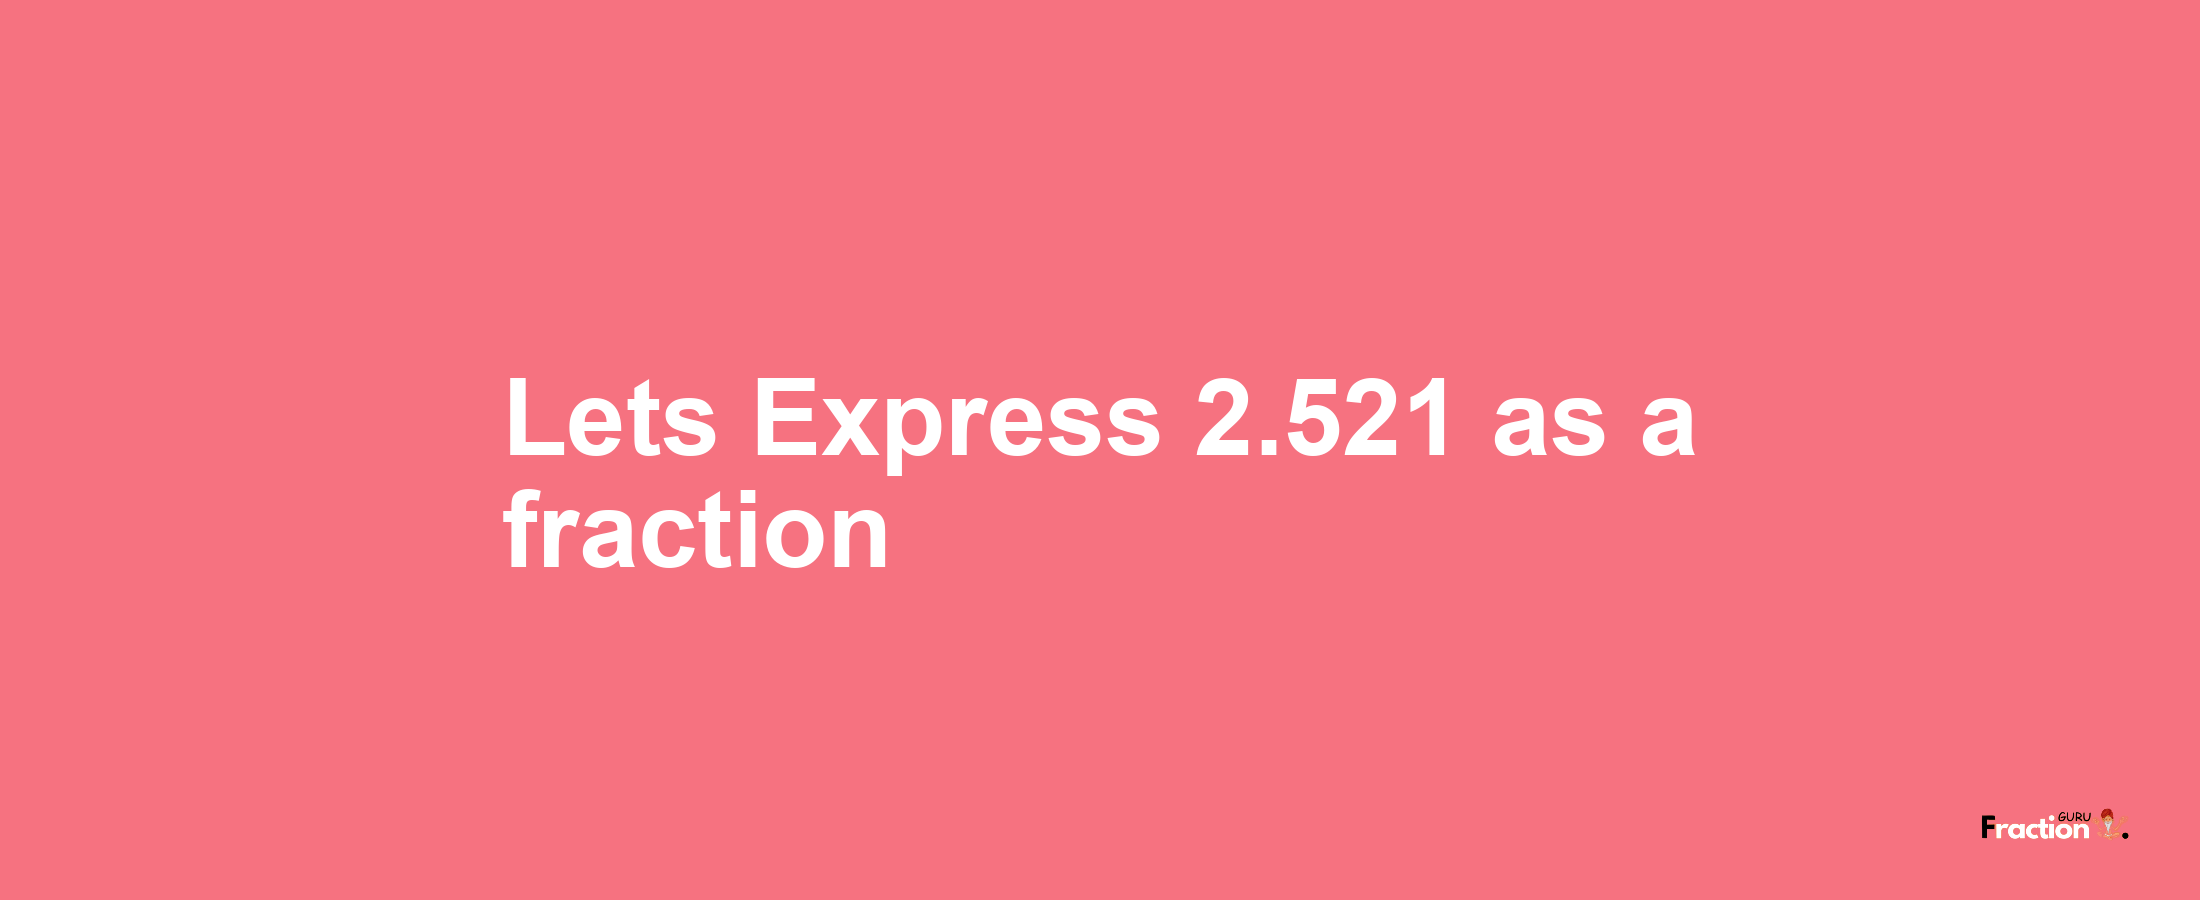 Lets Express 2.521 as afraction